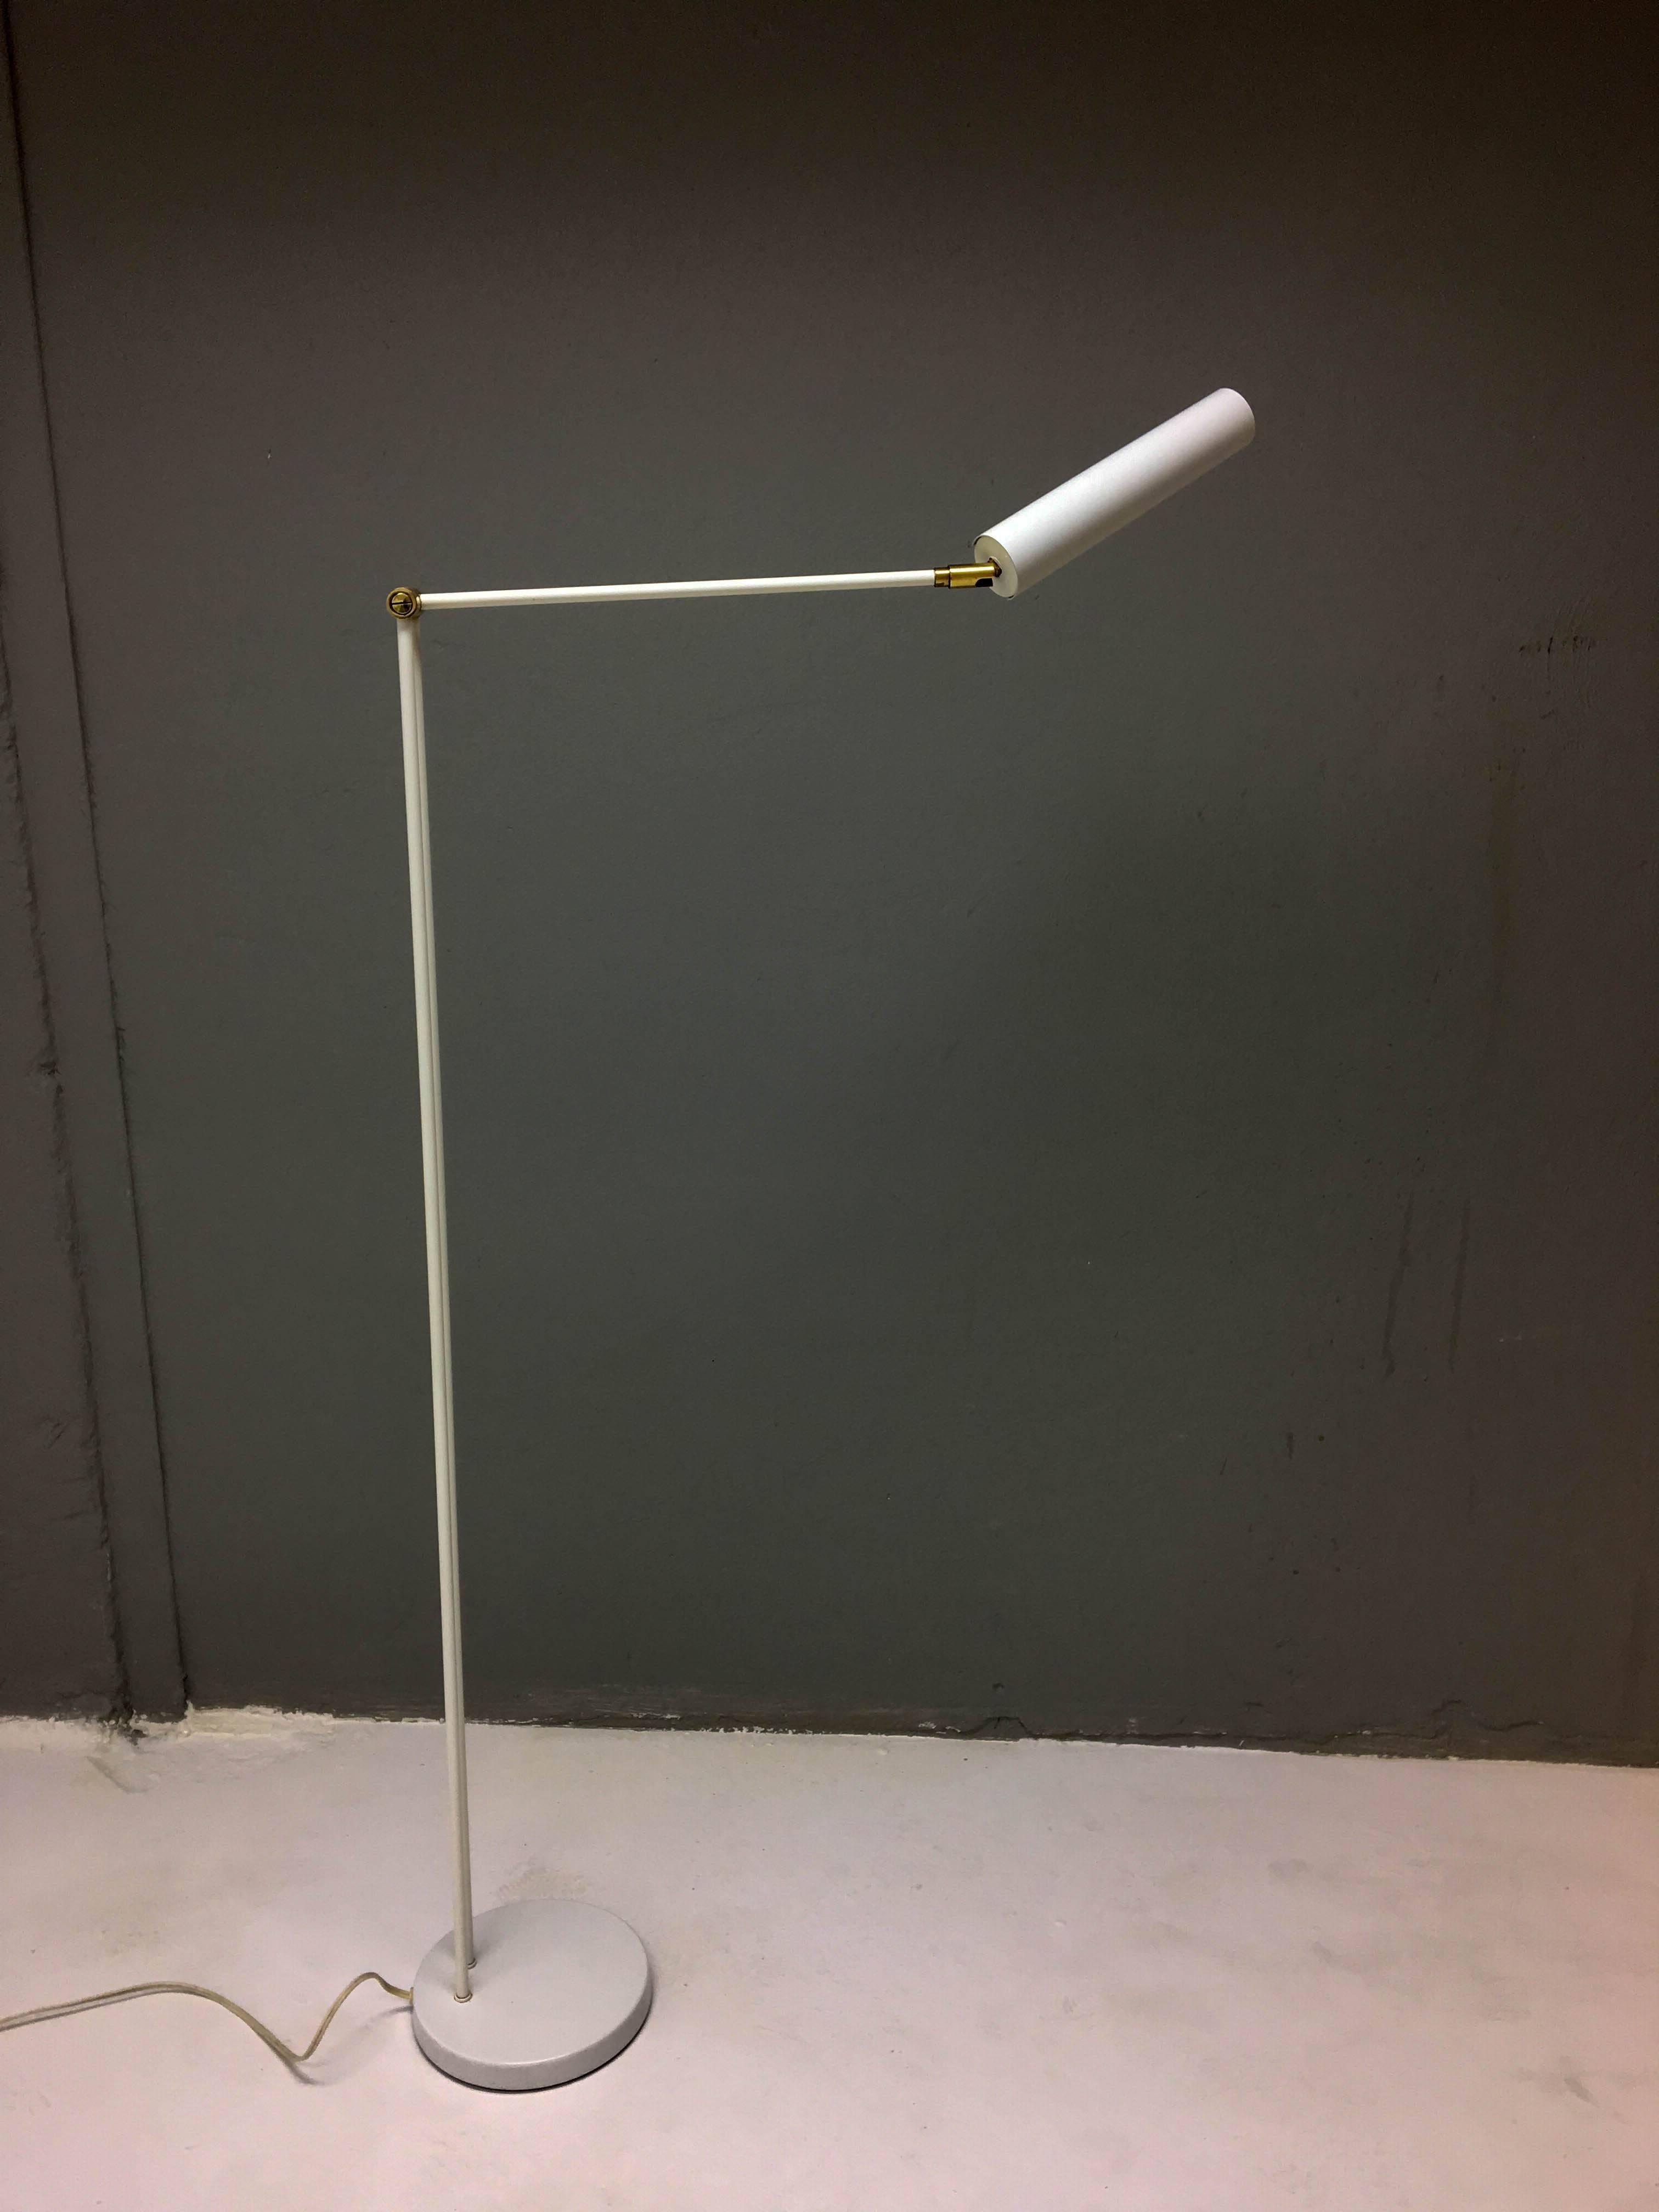 Elegant Koch & Lowy OMI floor standing reading lamp in white and brass, 1970s. Very rare model.